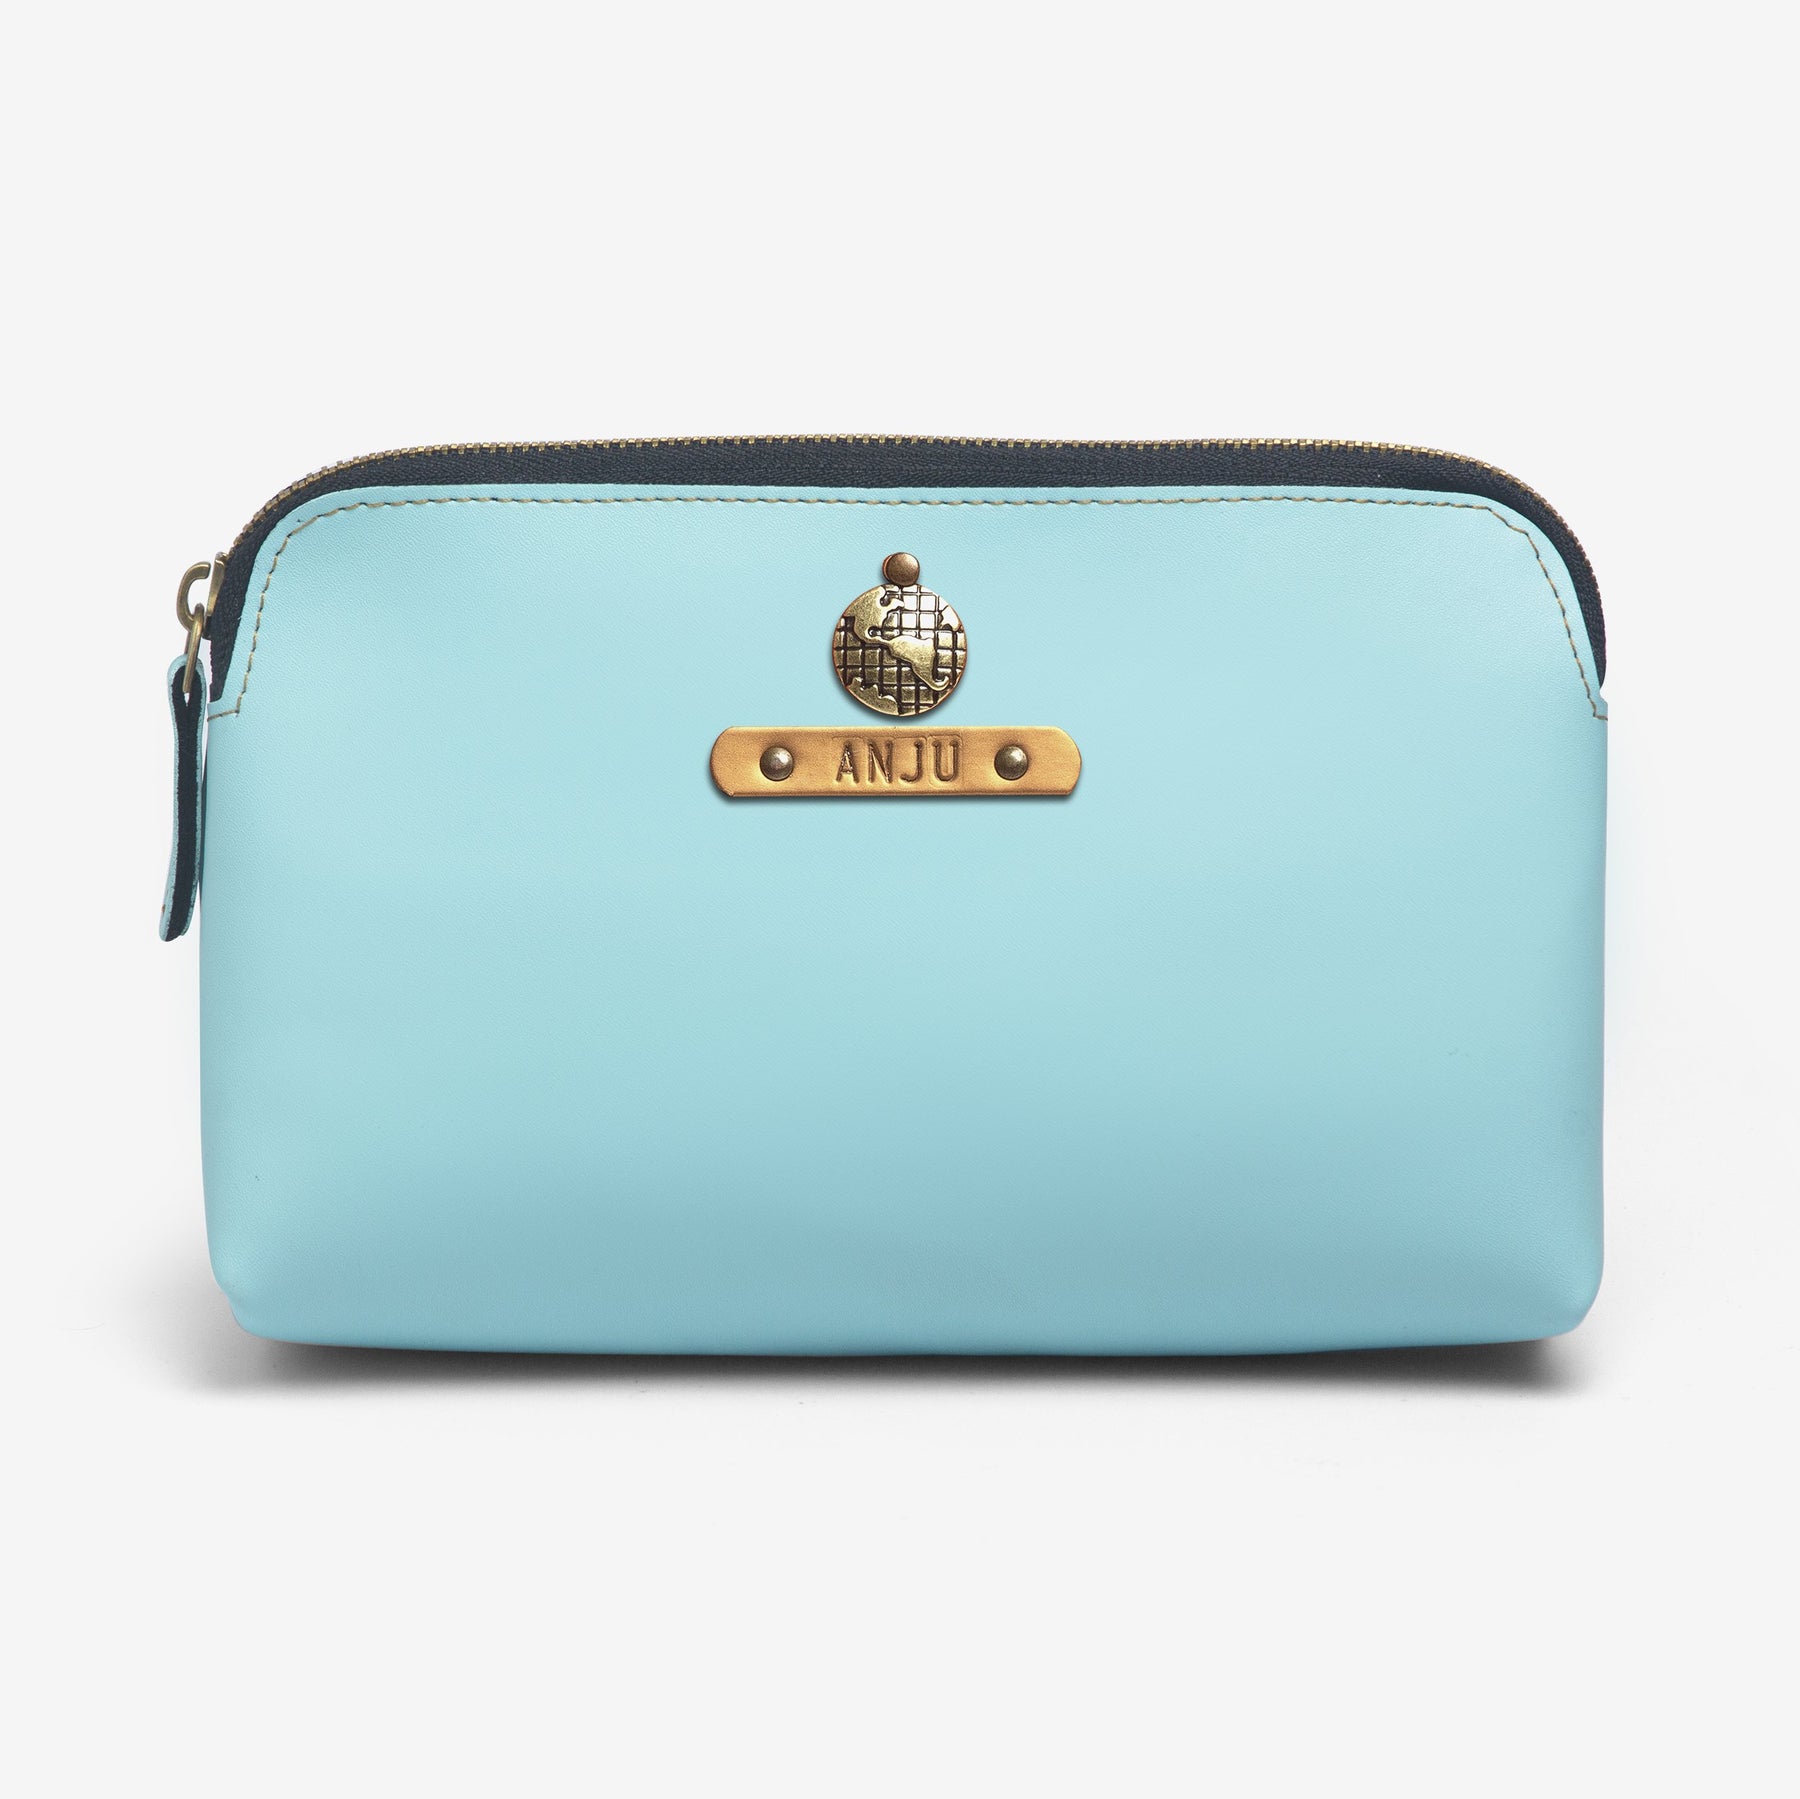 Personalized Carry All/Makeup Pouch - Mint Blue